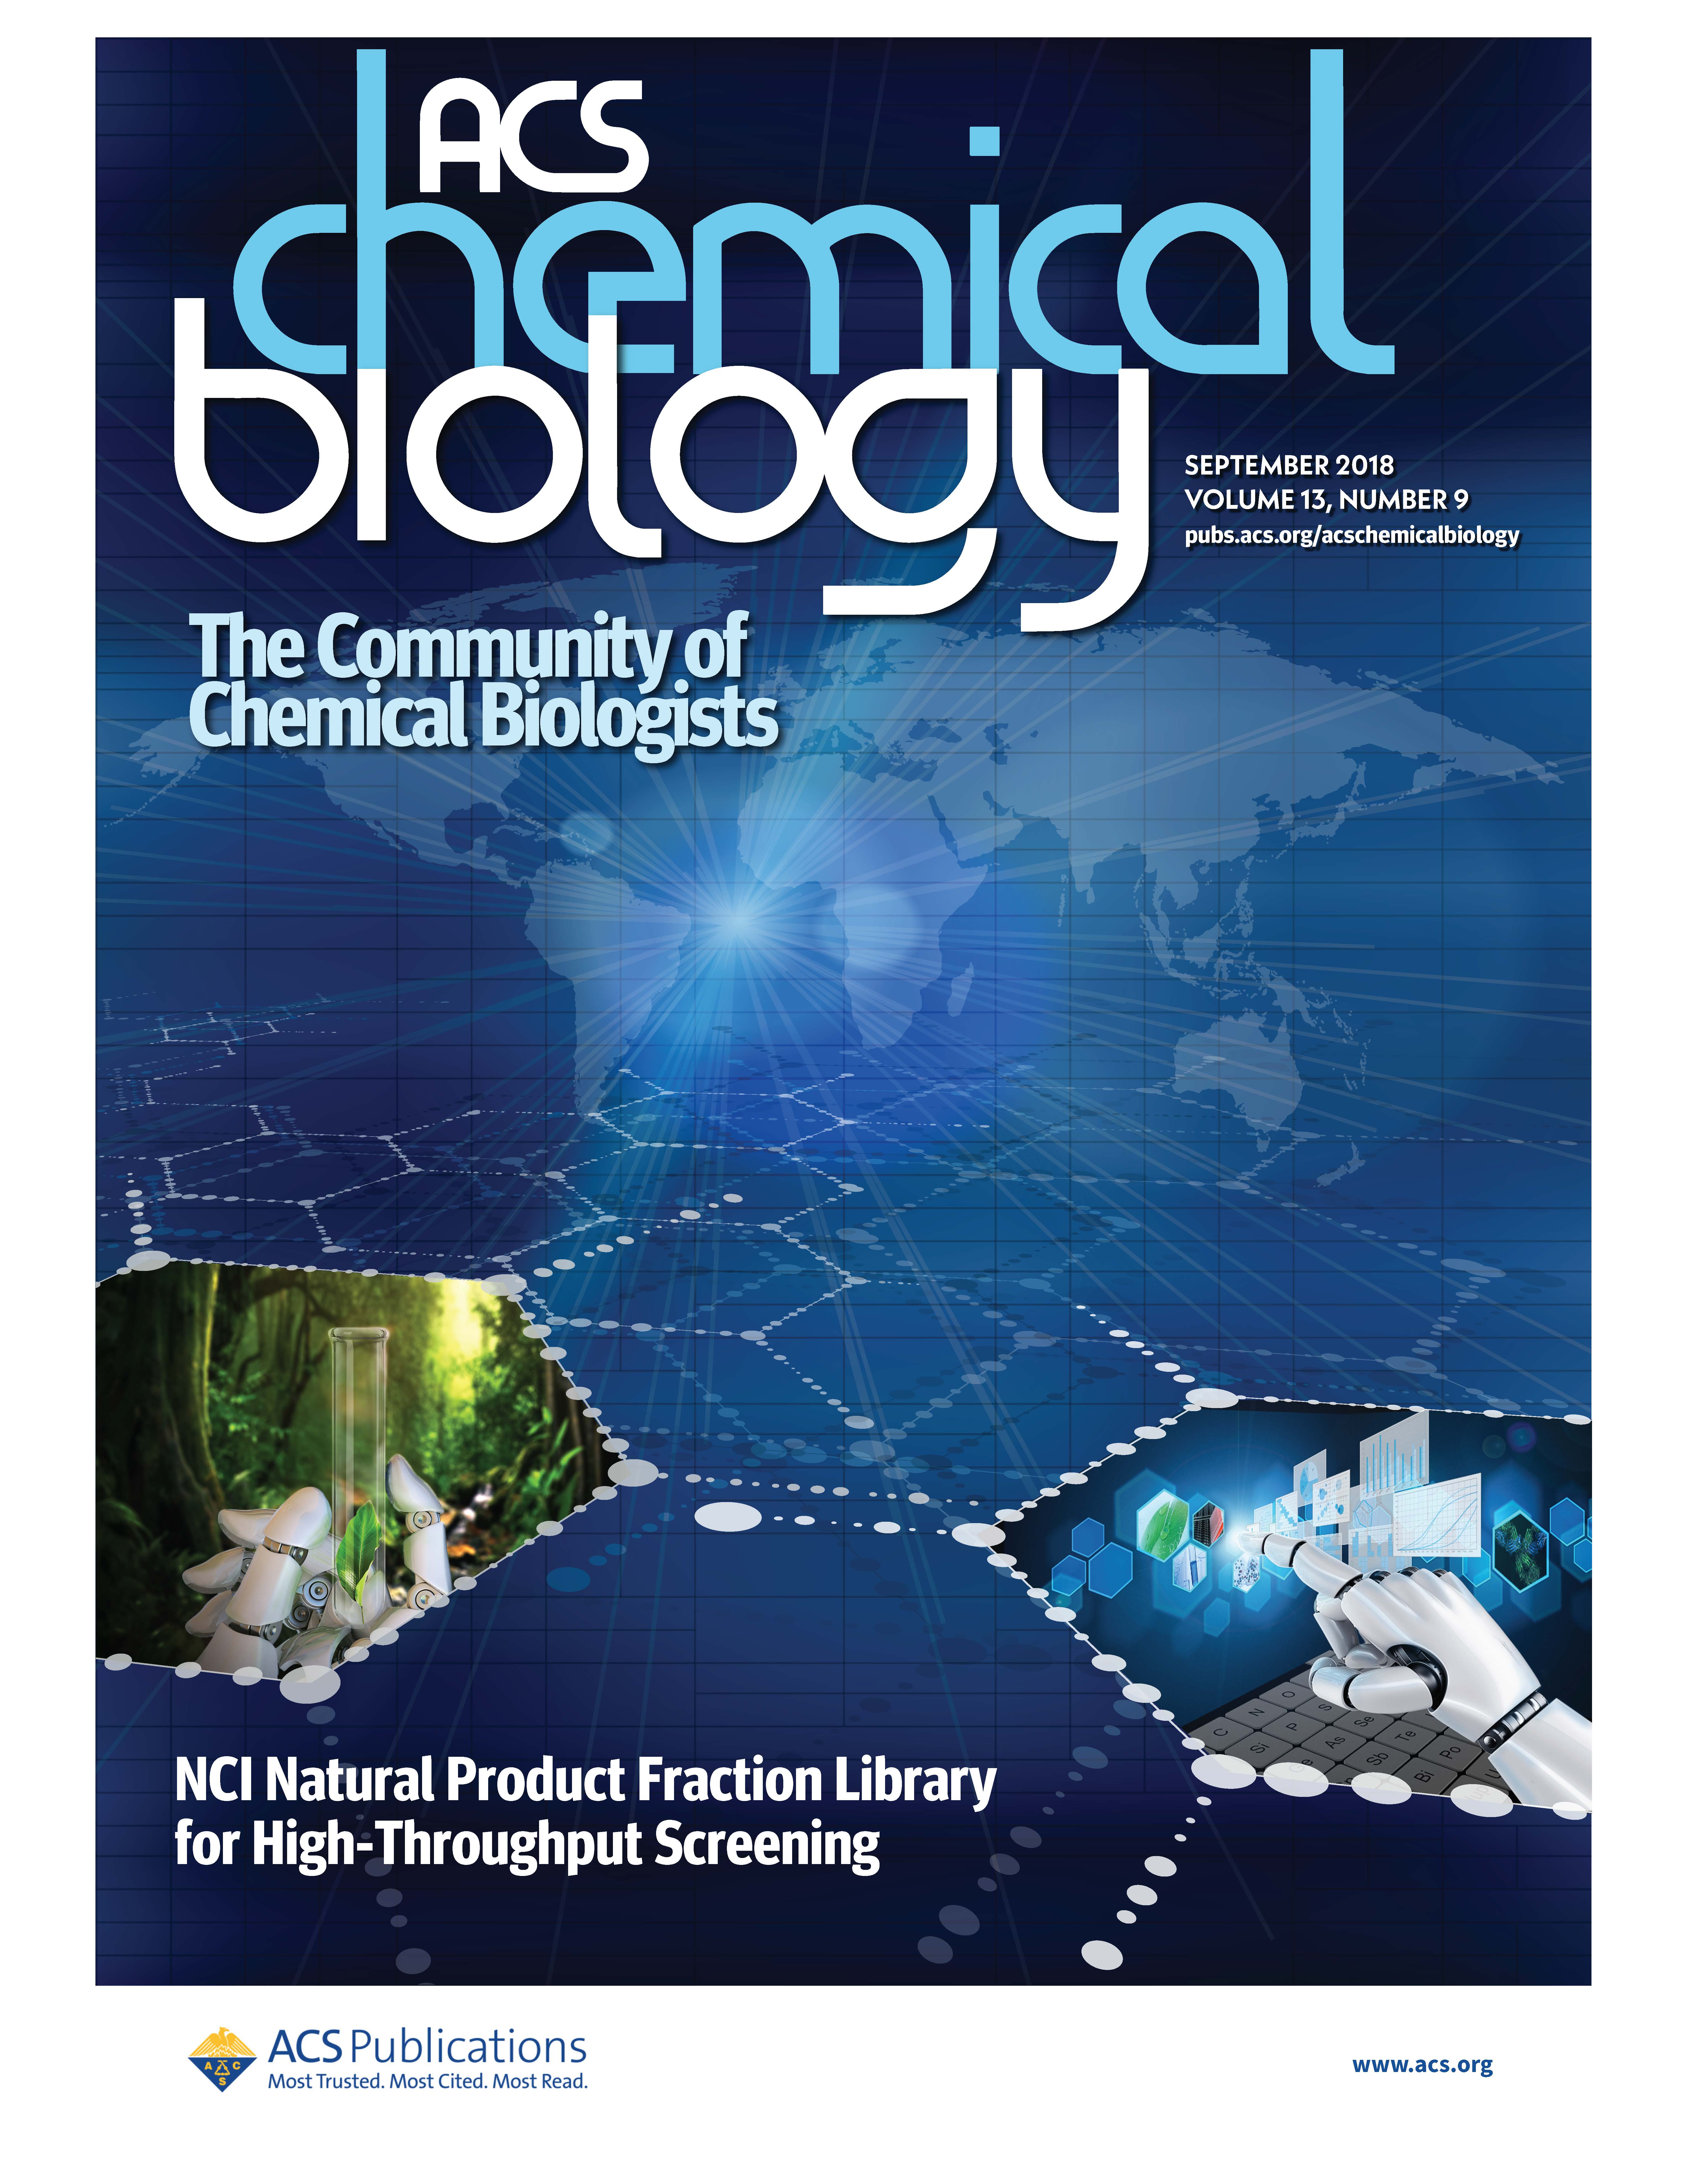 NCI extract libraries